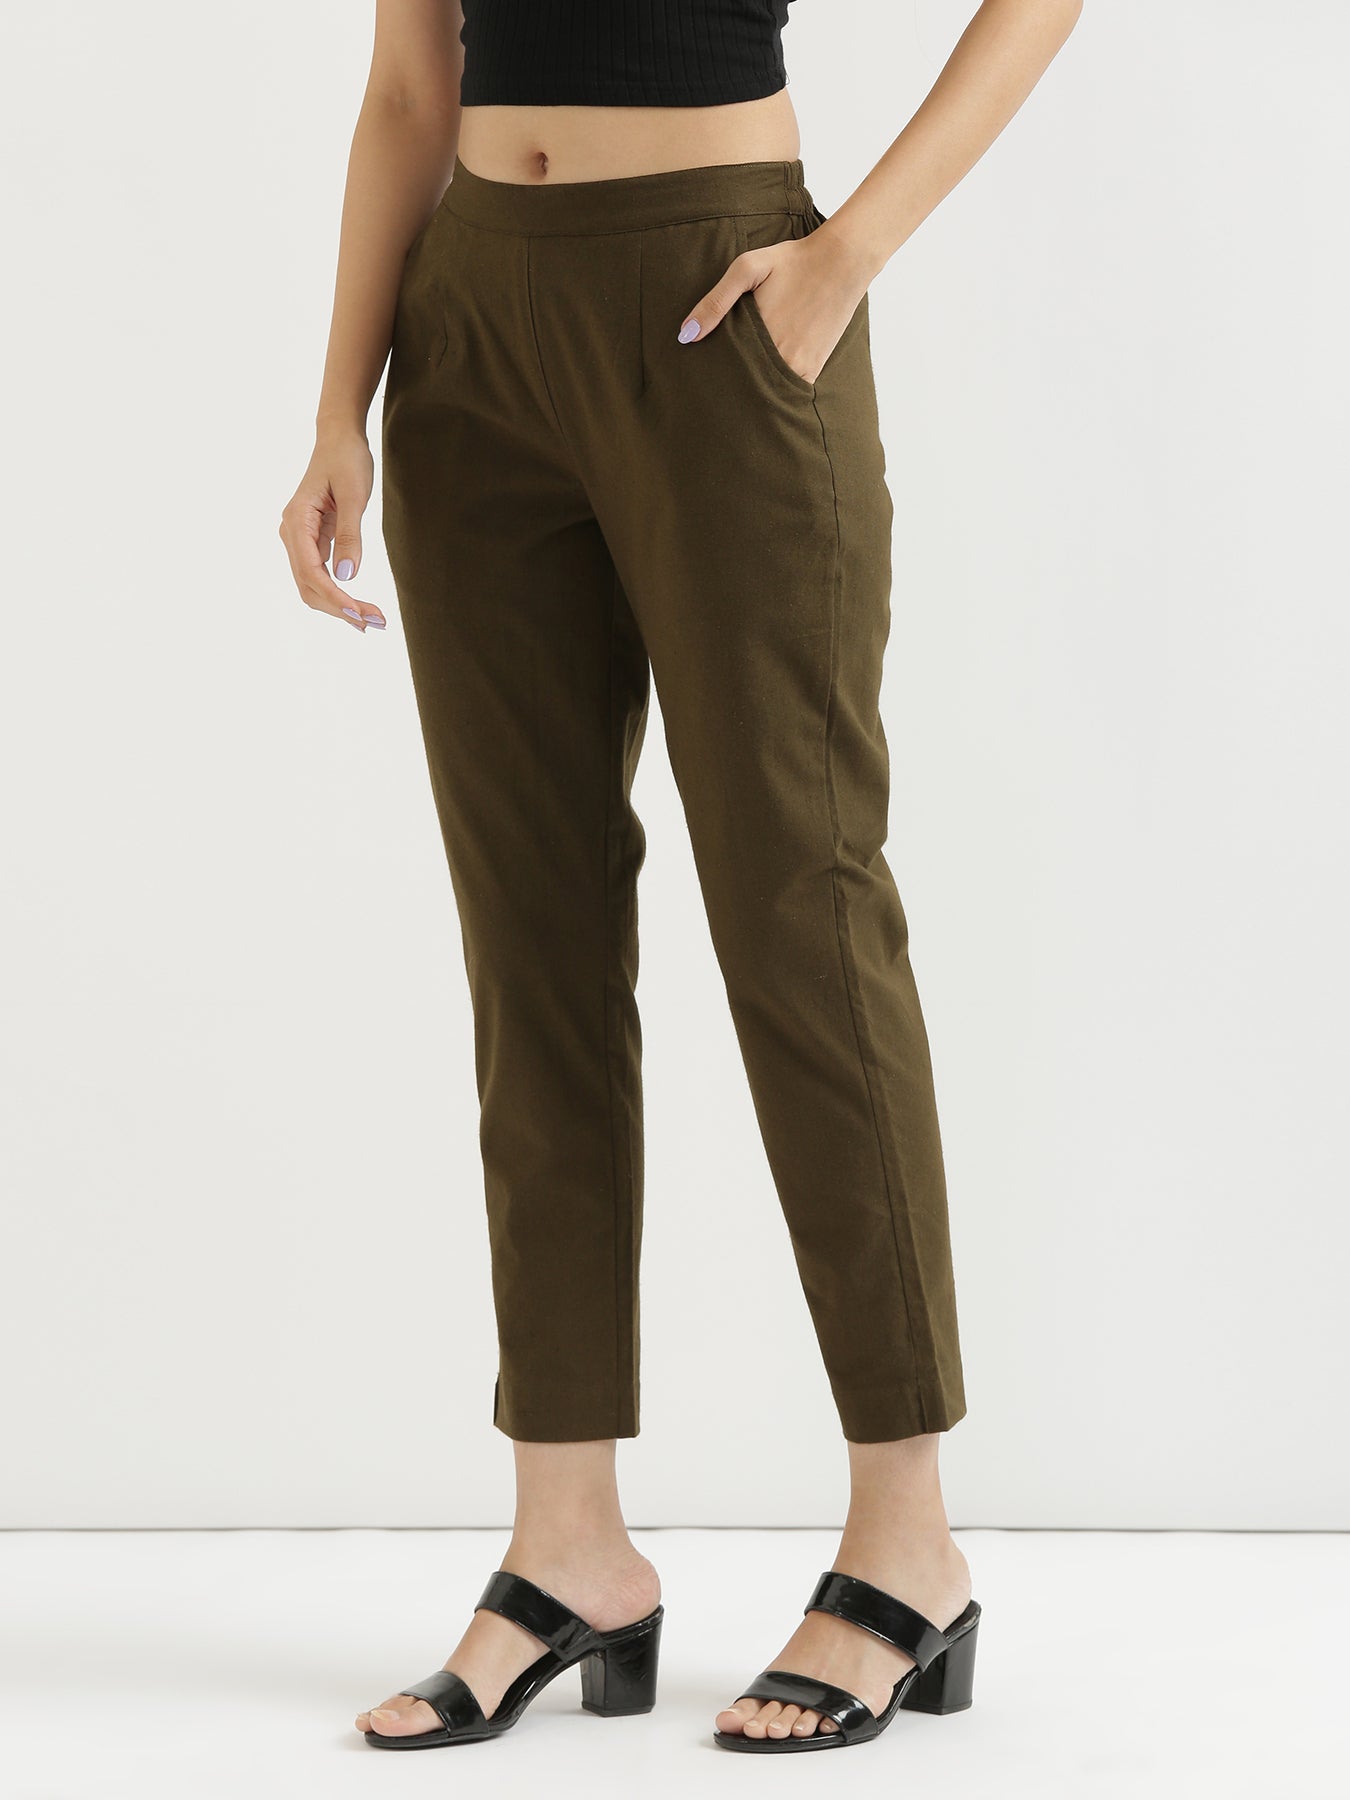 How best can you style an olive green pants with a women's top? - Quora